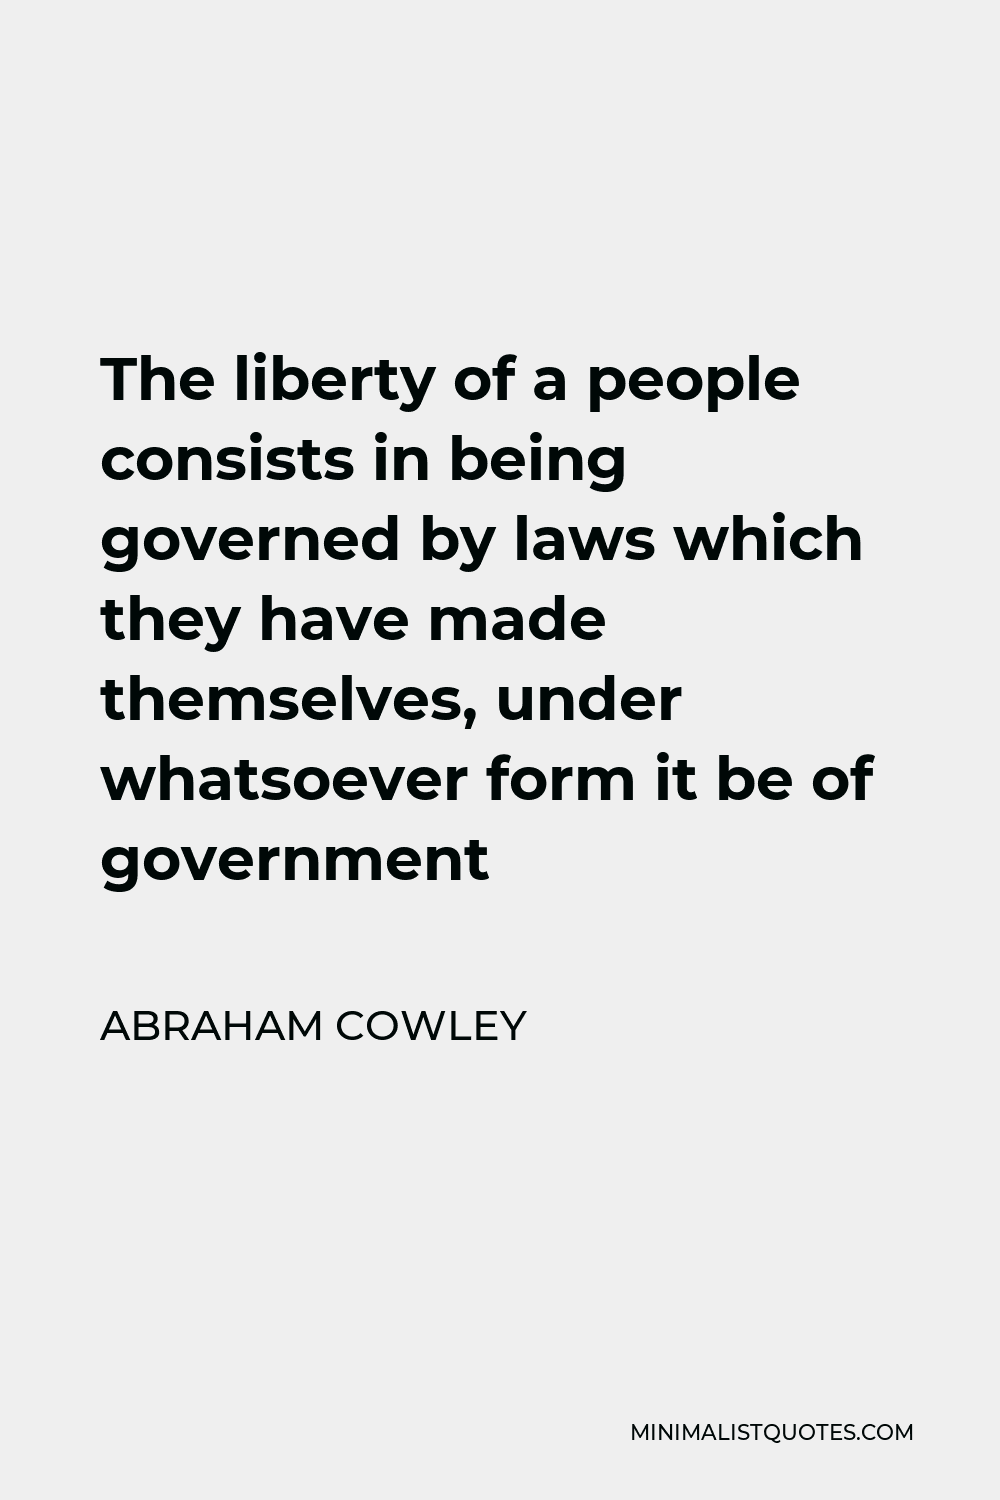 Abraham Cowley Quote - The liberty of a people consists in being governed by laws which they have made themselves, under whatsoever form it be of government